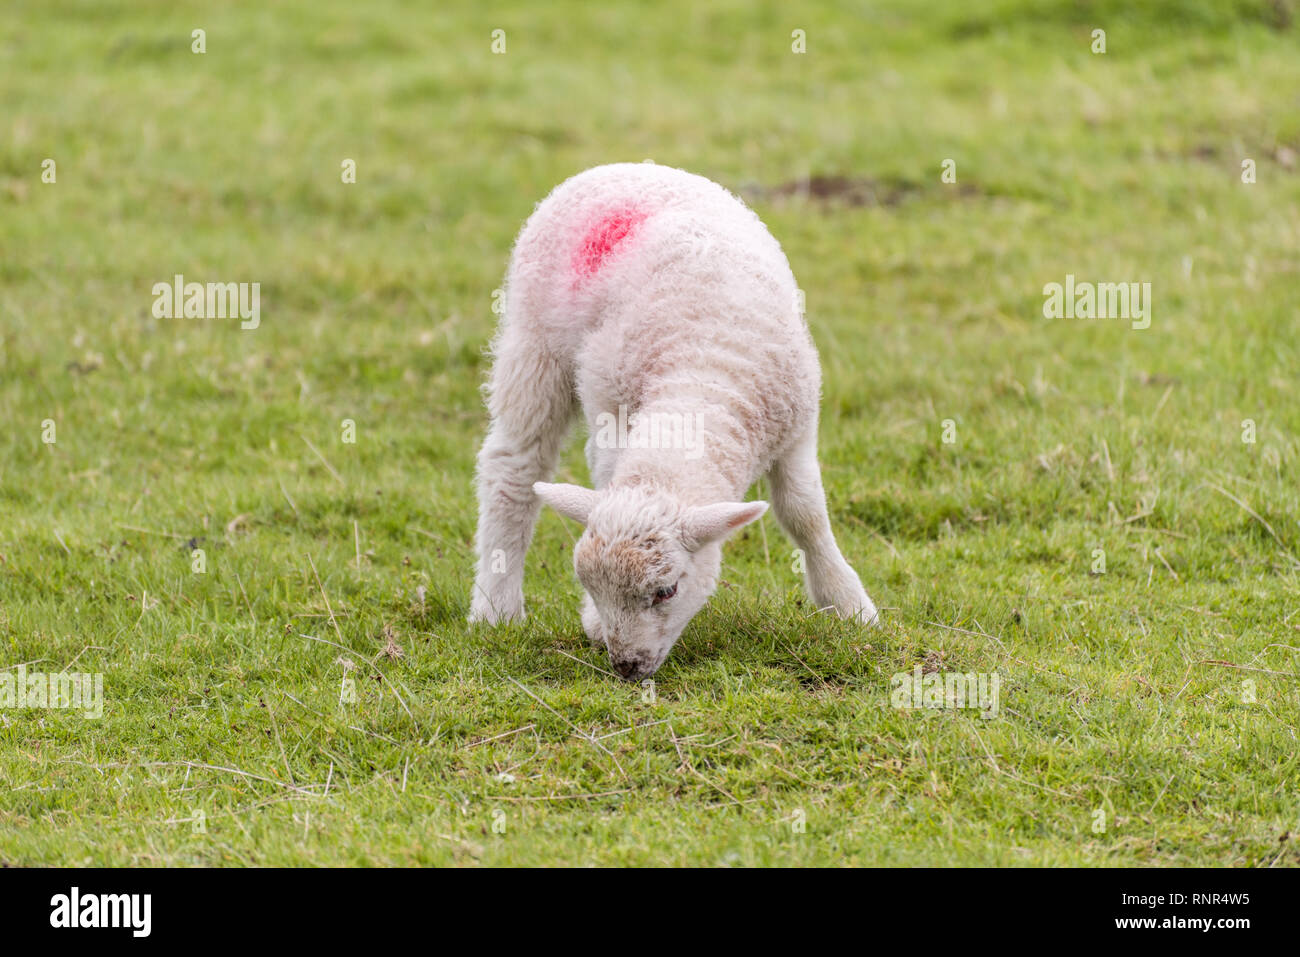 A cute little lamb is grazing in a field during springtime. Stock Photo